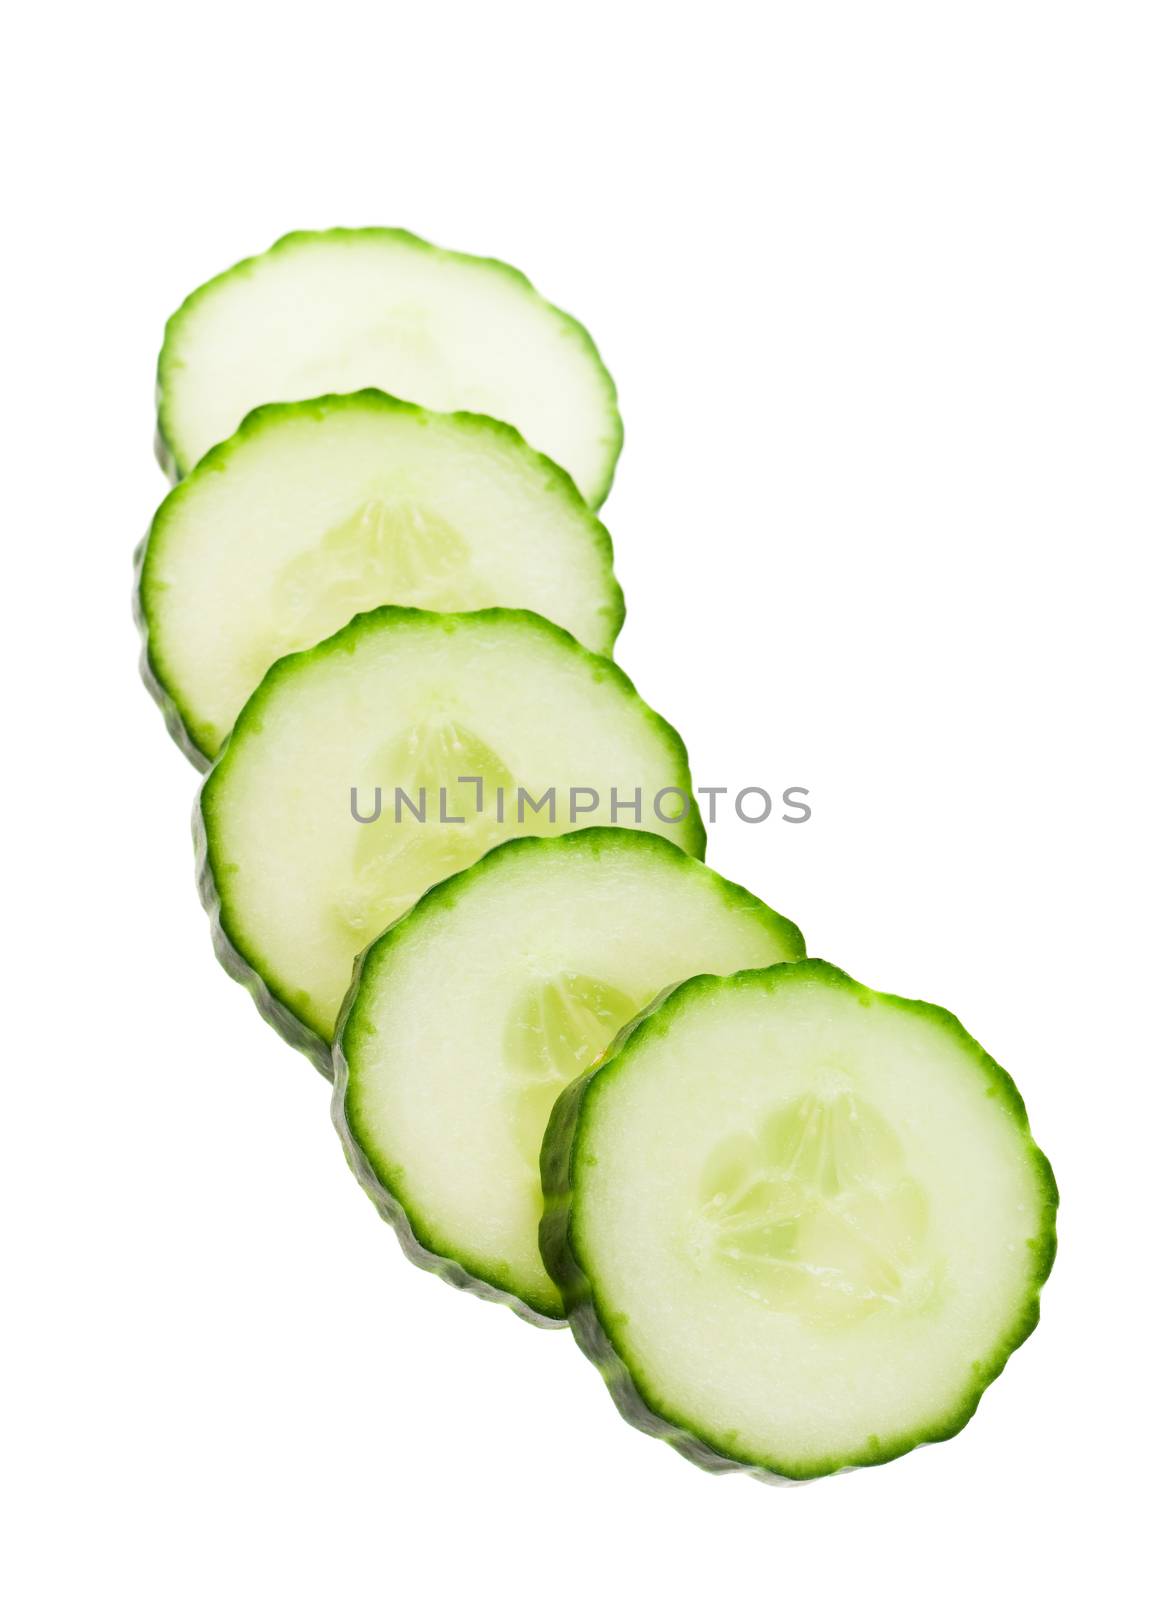 English Cucumber Slices by songbird839